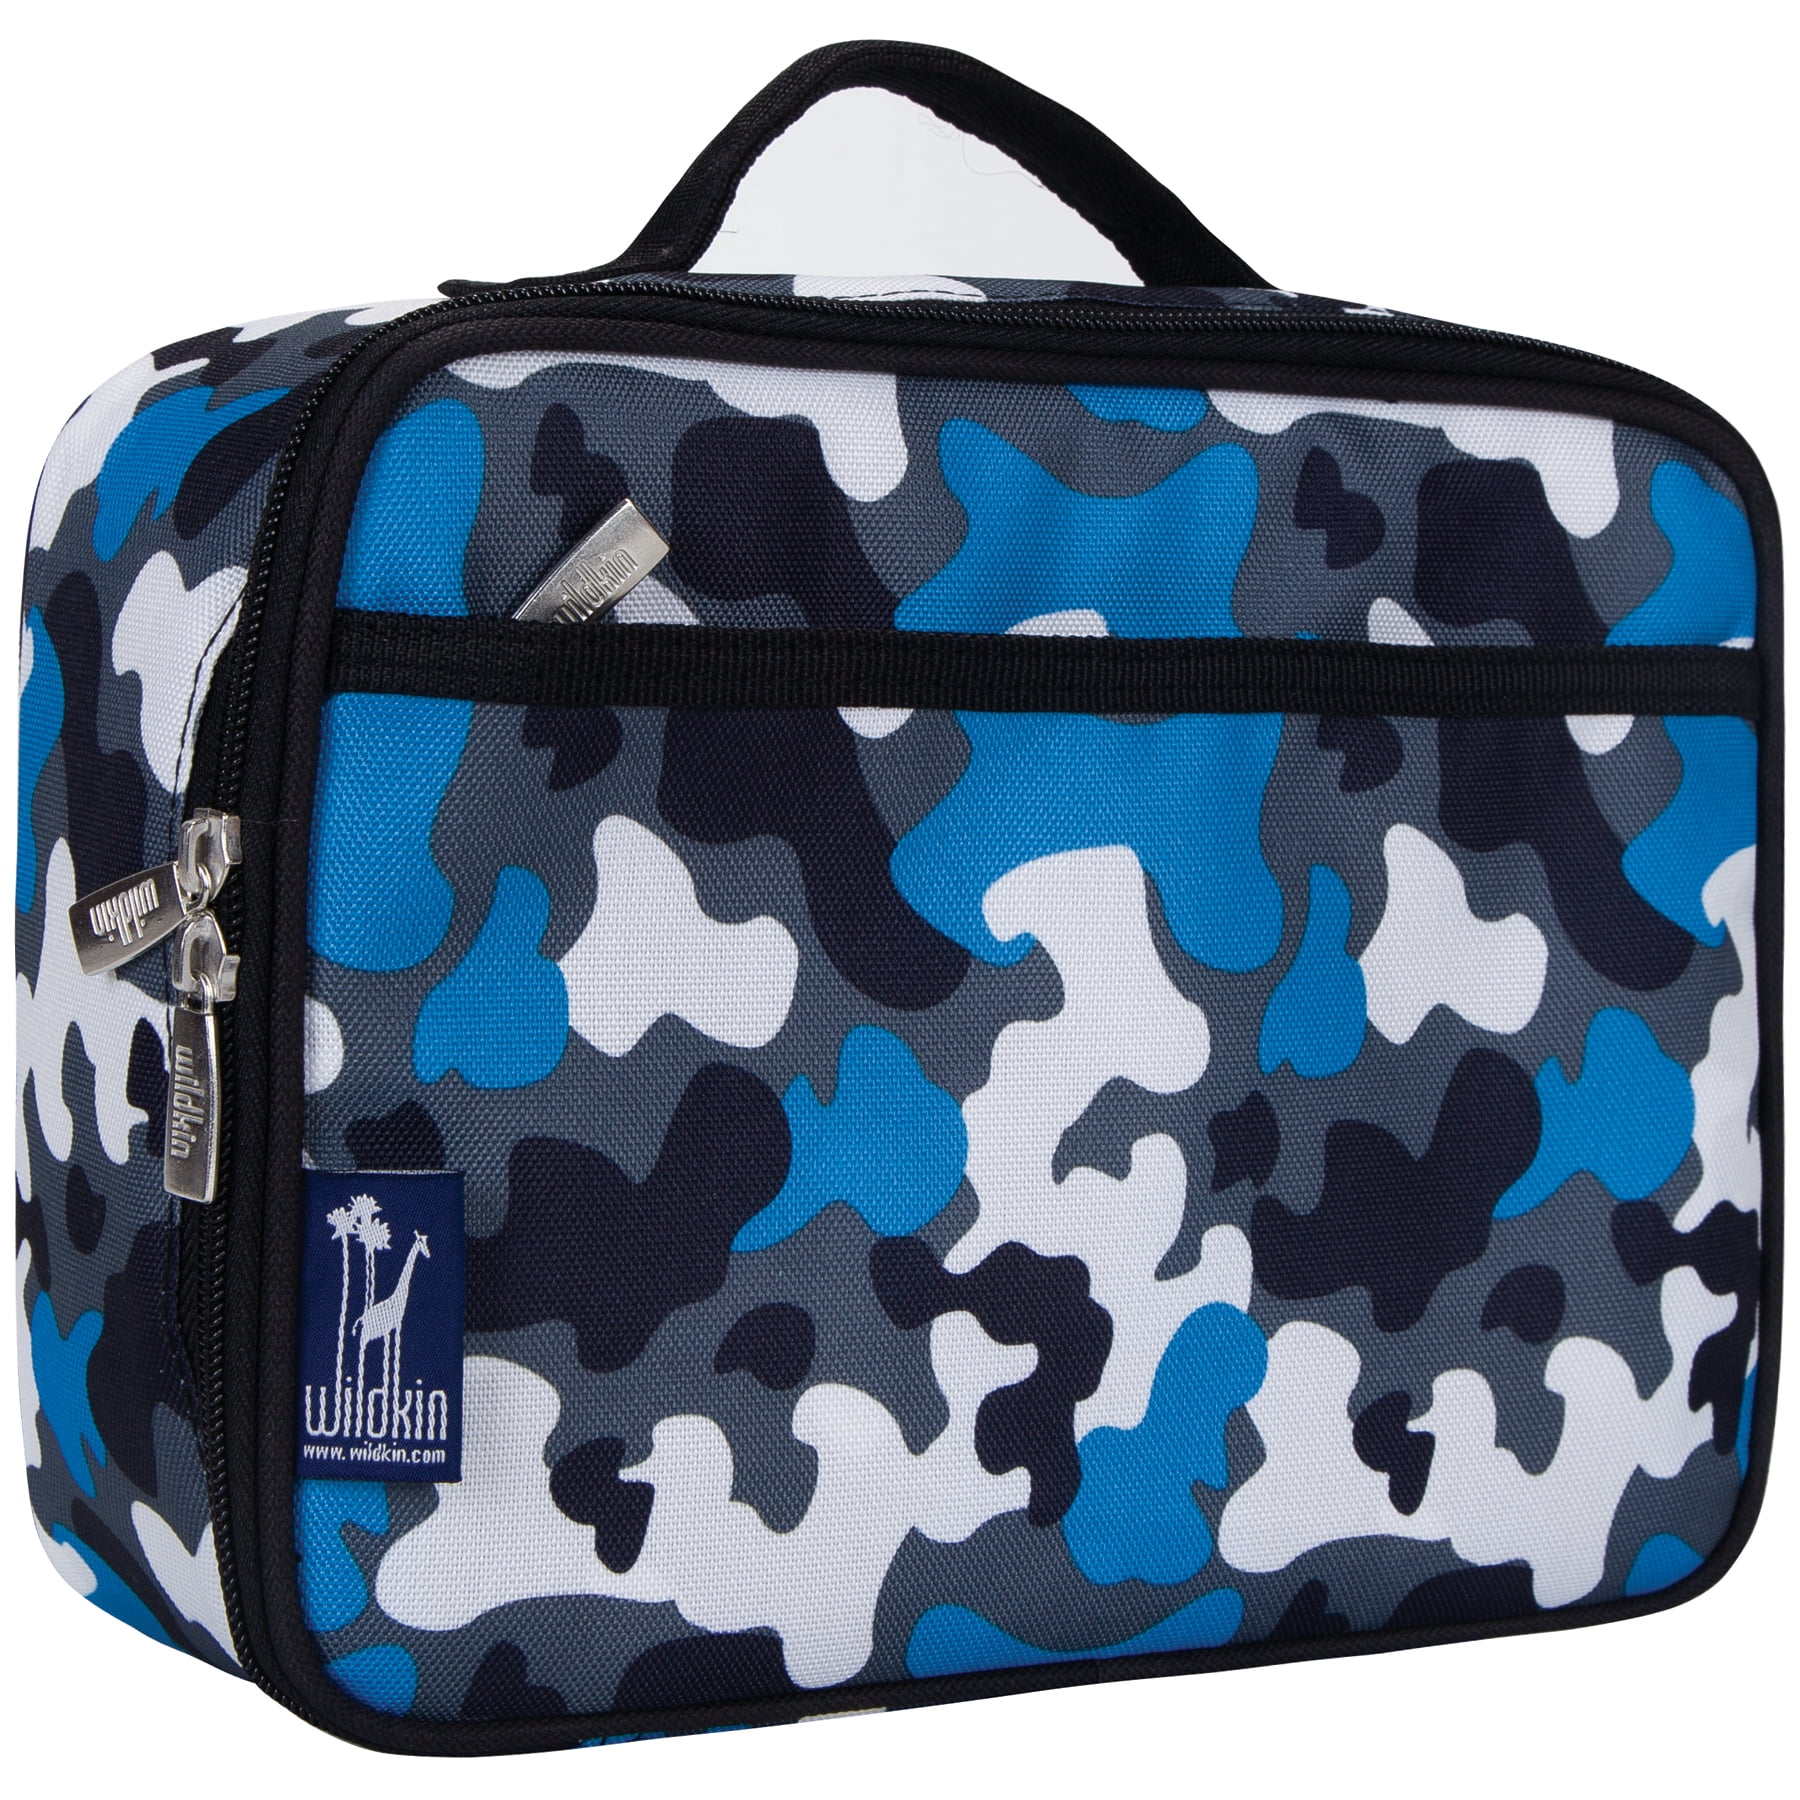 camouflage lunch box